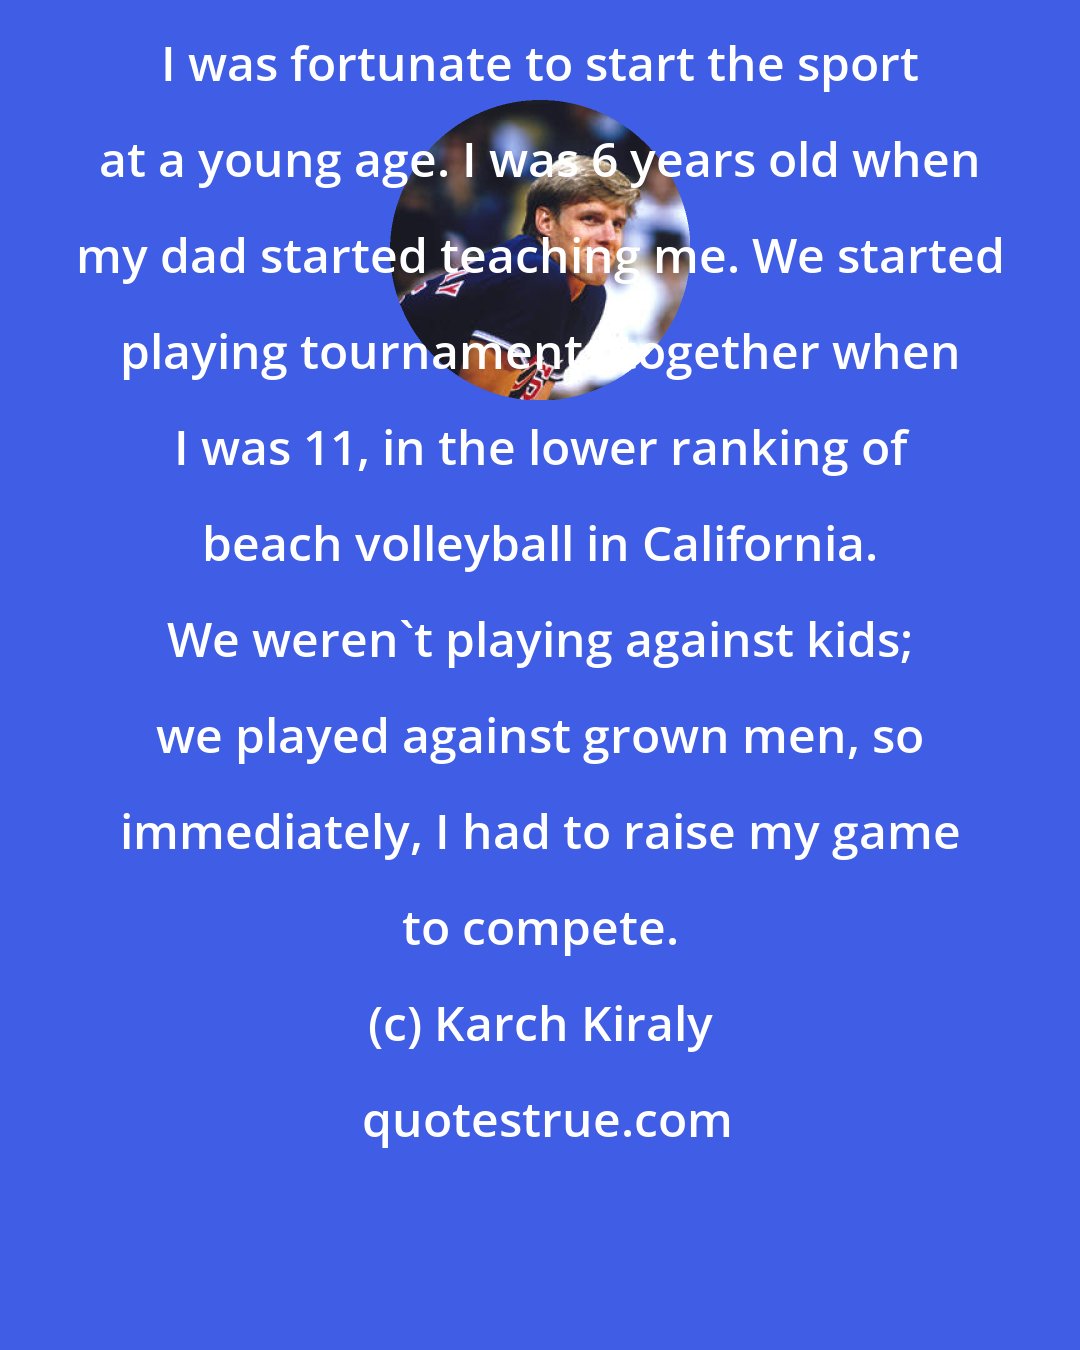 Karch Kiraly: I was fortunate to start the sport at a young age. I was 6 years old when my dad started teaching me. We started playing tournaments together when I was 11, in the lower ranking of beach volleyball in California. We weren't playing against kids; we played against grown men, so immediately, I had to raise my game to compete.